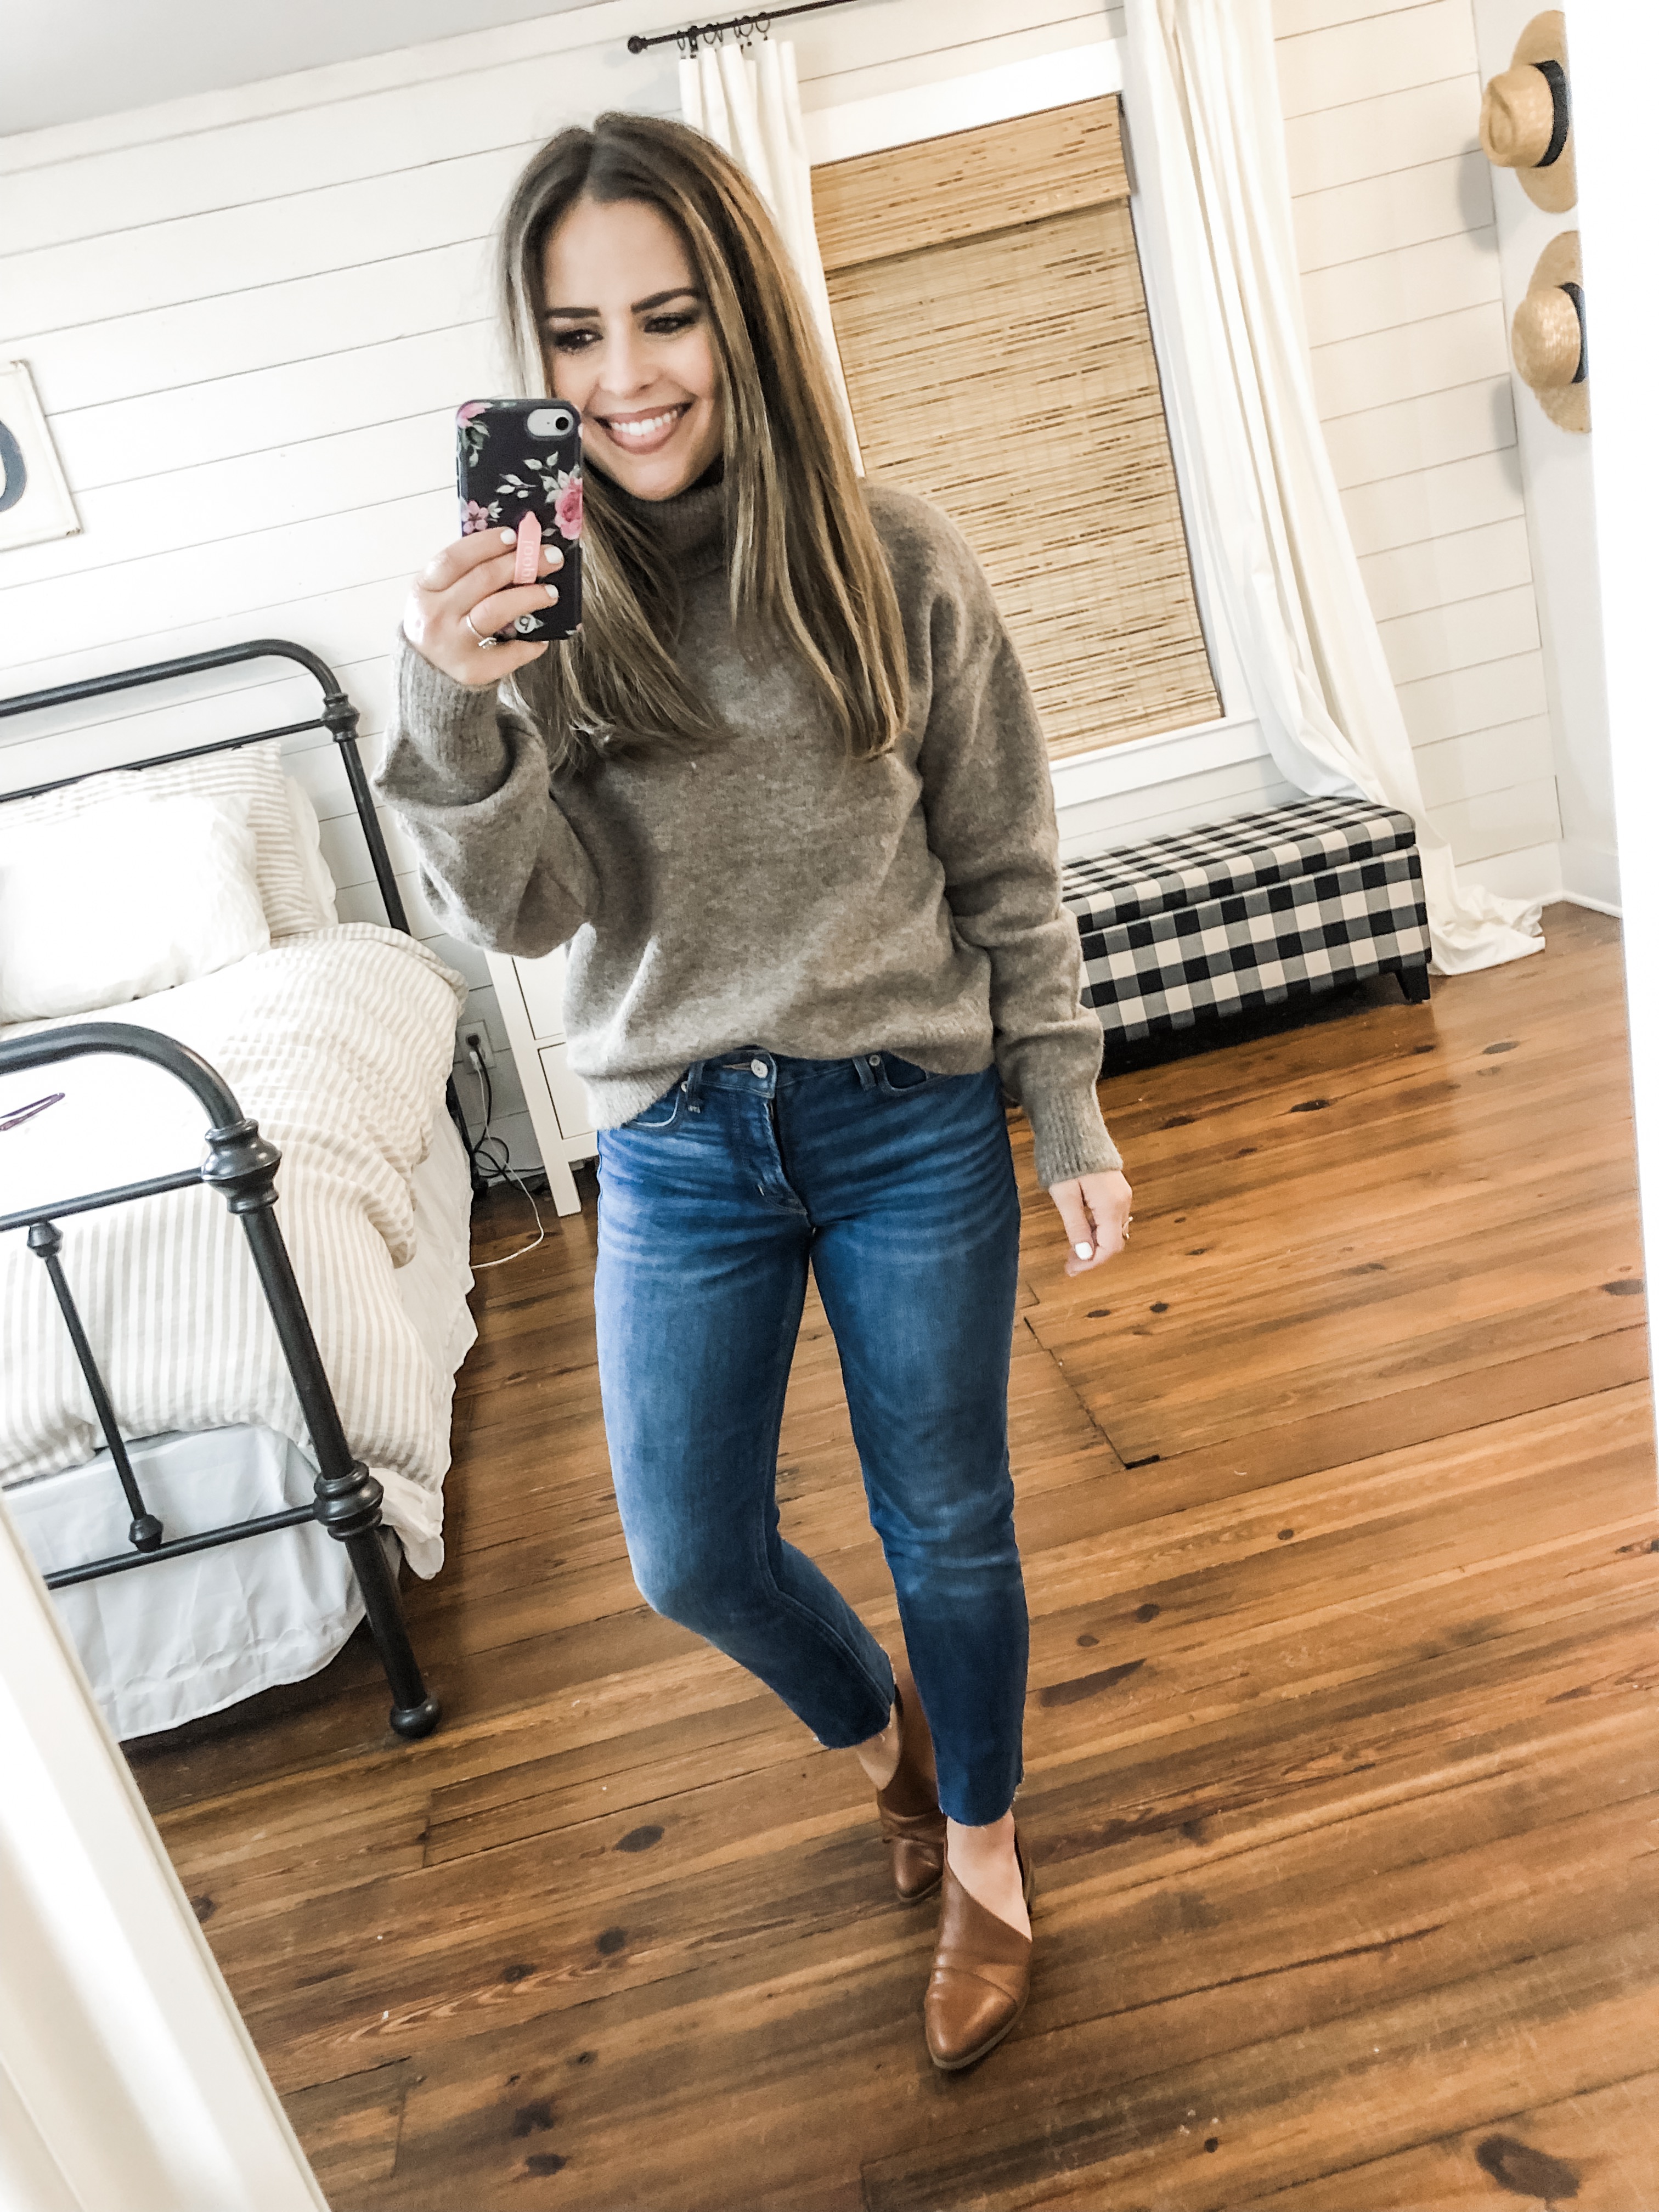 5 fall capsule sweaters for the gal on a budget. - dress cori lynn